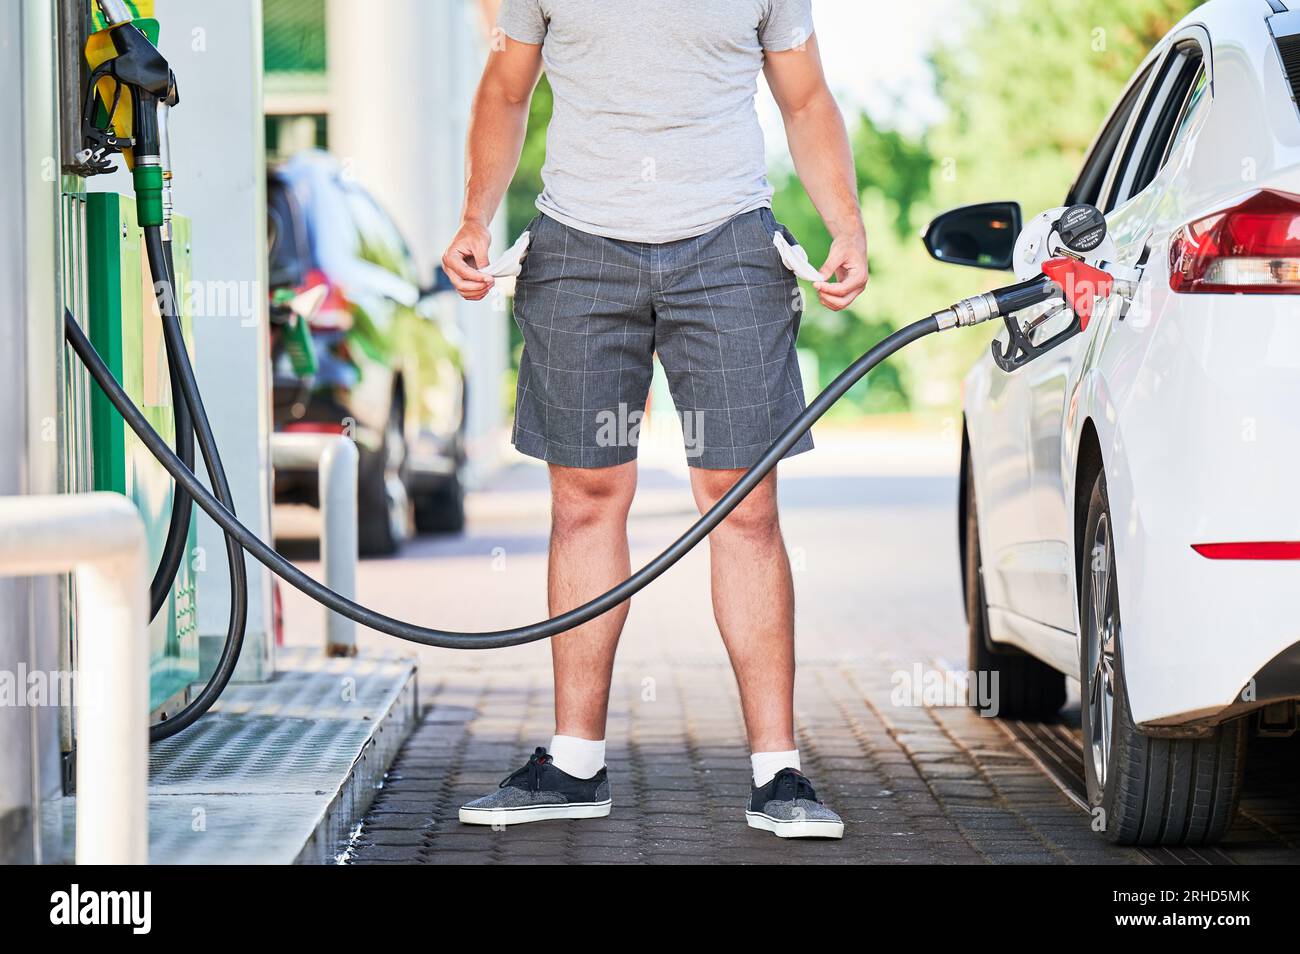 Man left with empty pockets after spending all money on fuel. Cropped view of man showing that he has no money after refueling his car. High fuel prices concept. Stock Photo